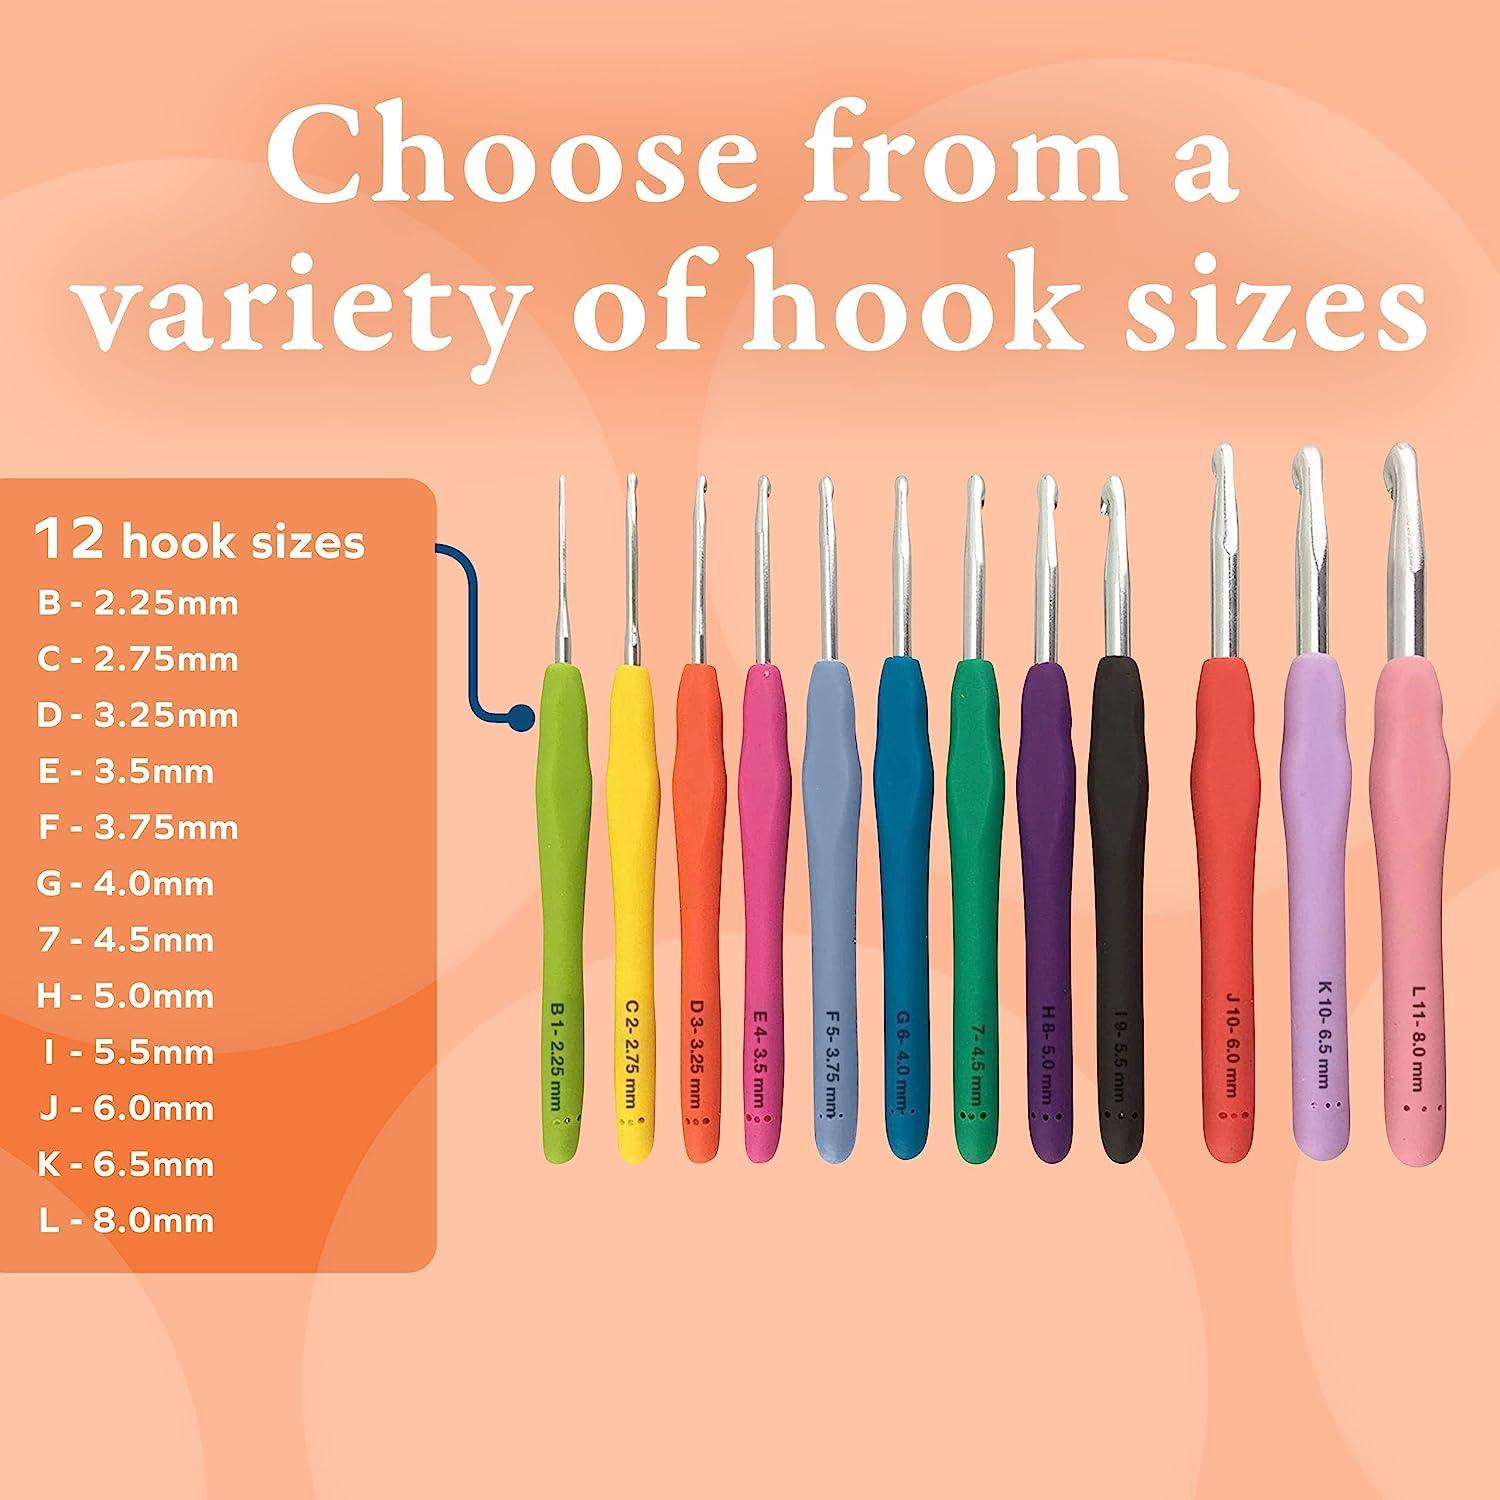 BeCraftee Crochet Hooks Kit - 12 Piece Set Extra-Long Crocheting Needles  with Soft, Ergonomic Rubber Grips and 12 Hook Sizes - Knitting & Crochet  Supplies for Beginners, Comfortable/Easy to Use Standard 12 Hook Set